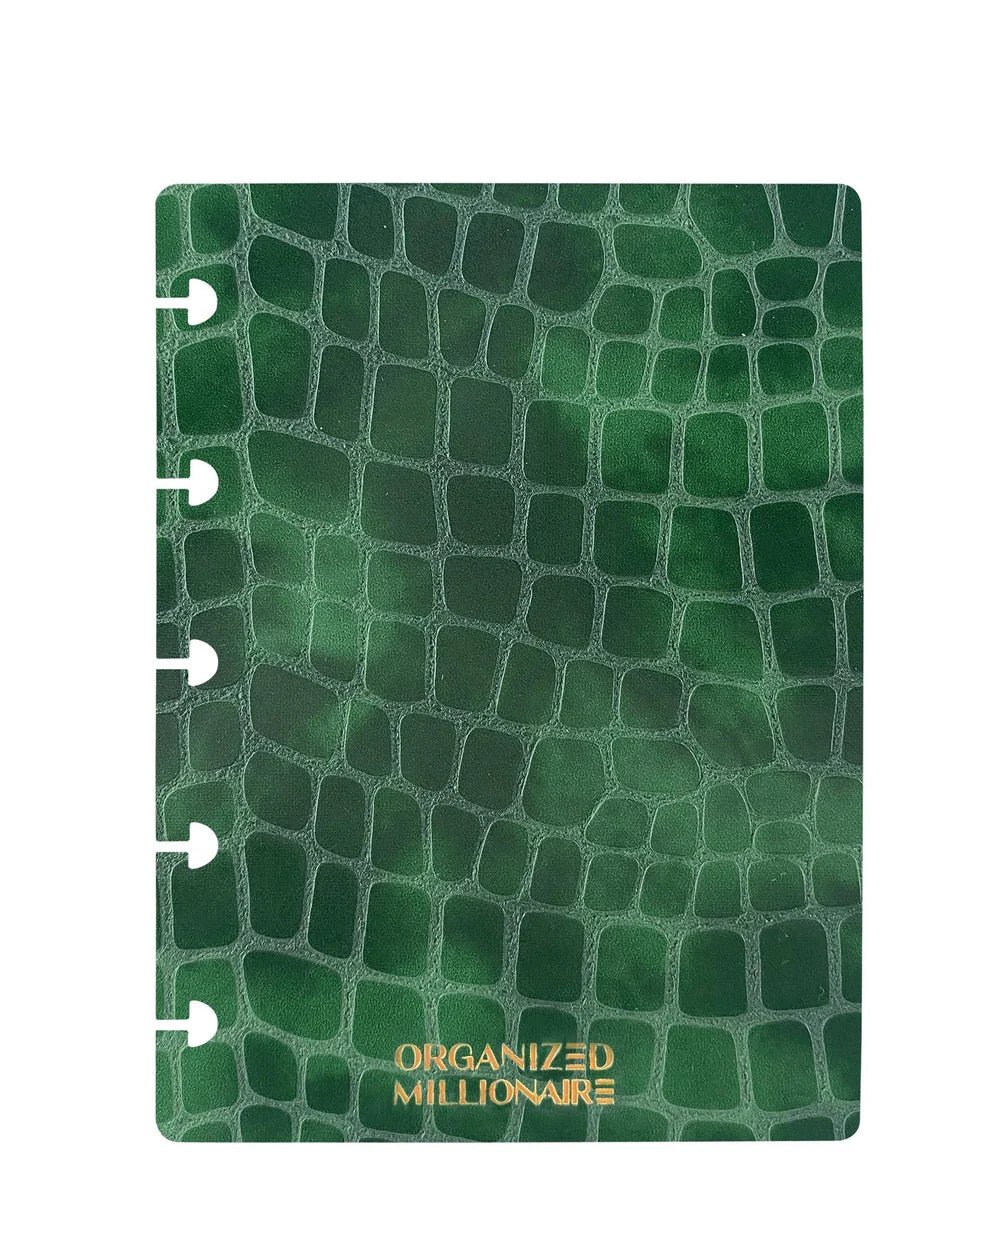 Croco Snap Covers Discbound Planner Covers | Set of 2 Green Cloud Croco